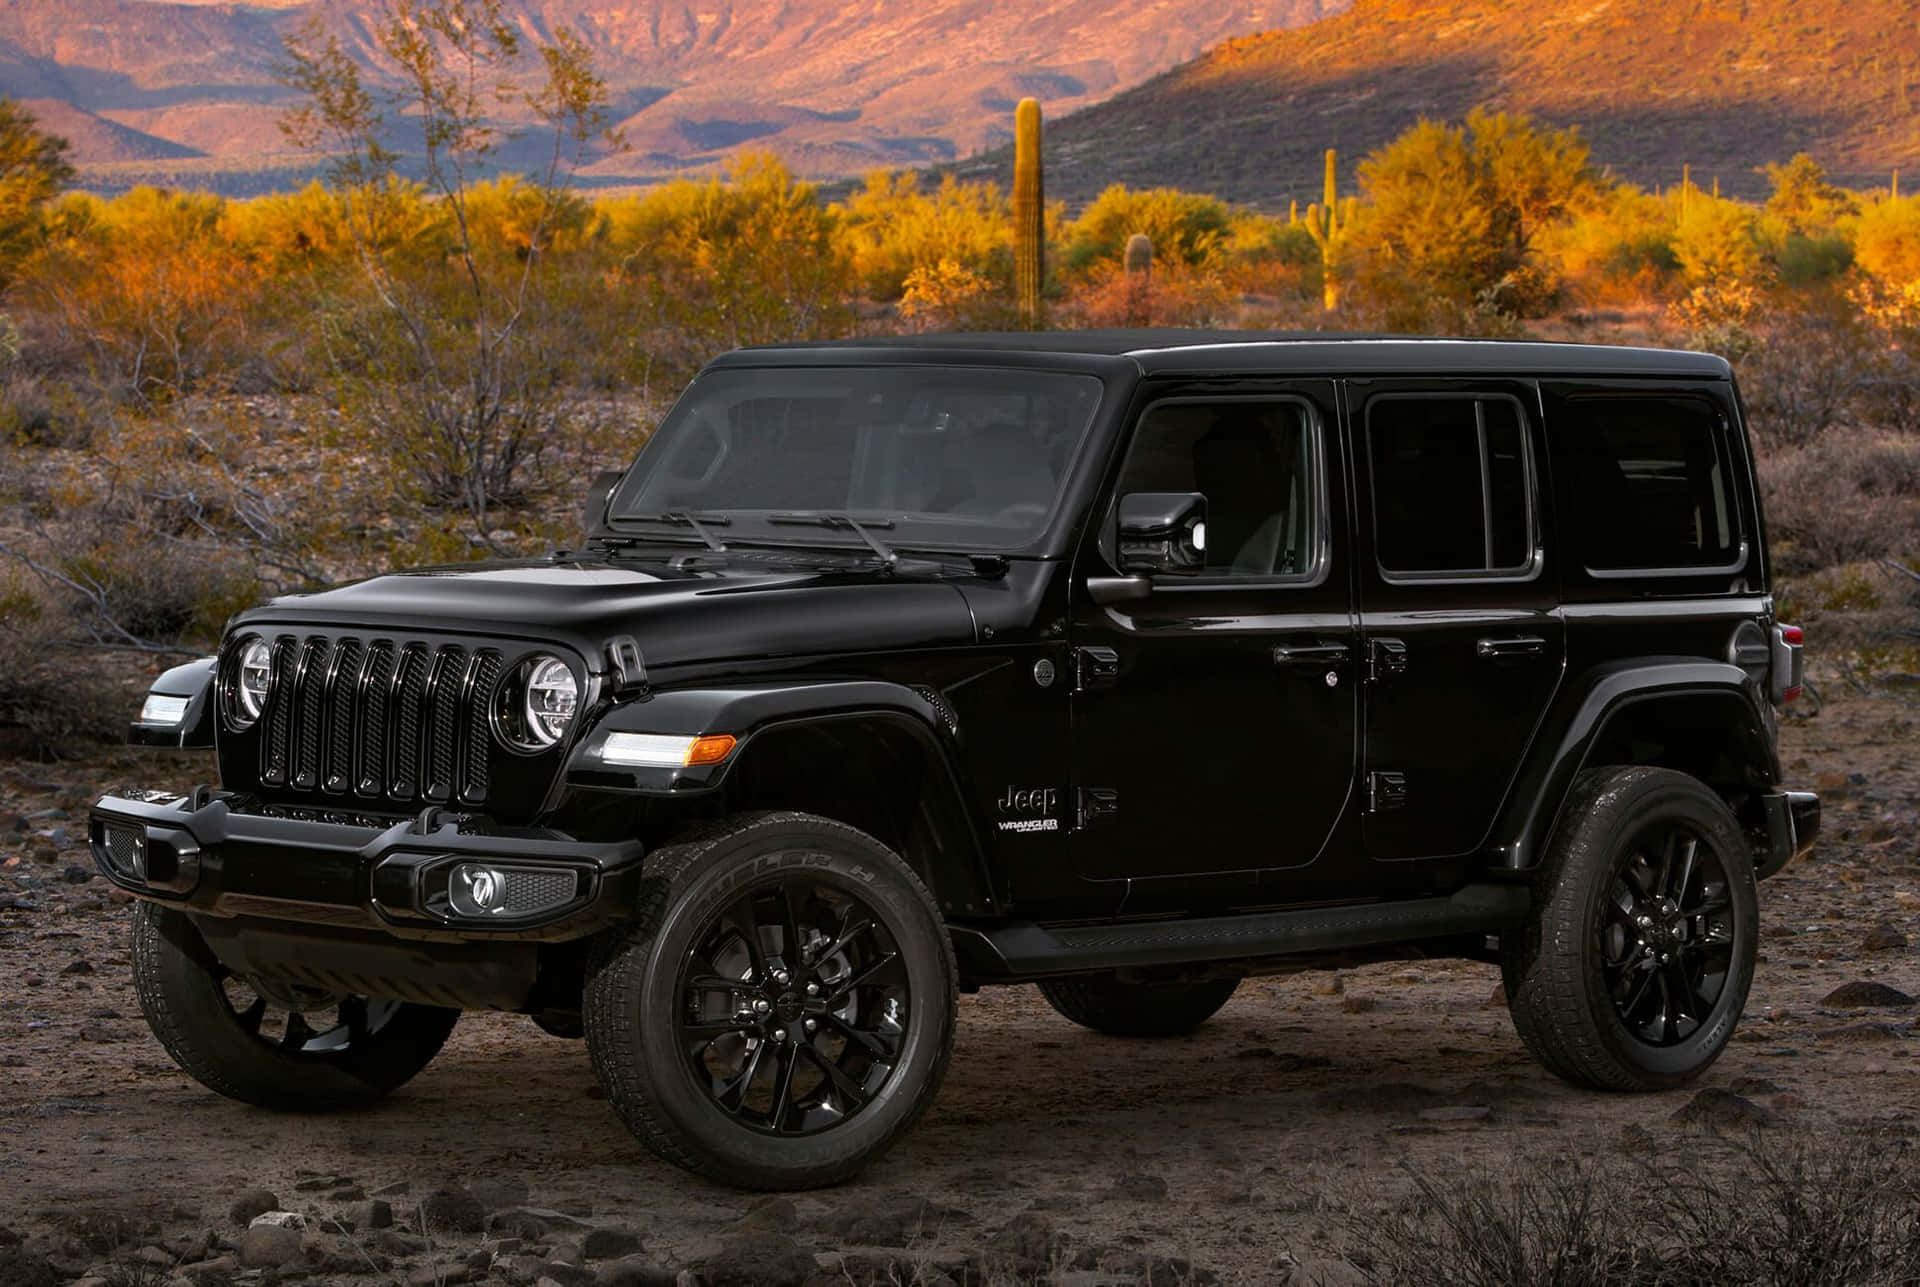 Get off the roads and onto the trails, in a Jeep Wrangler